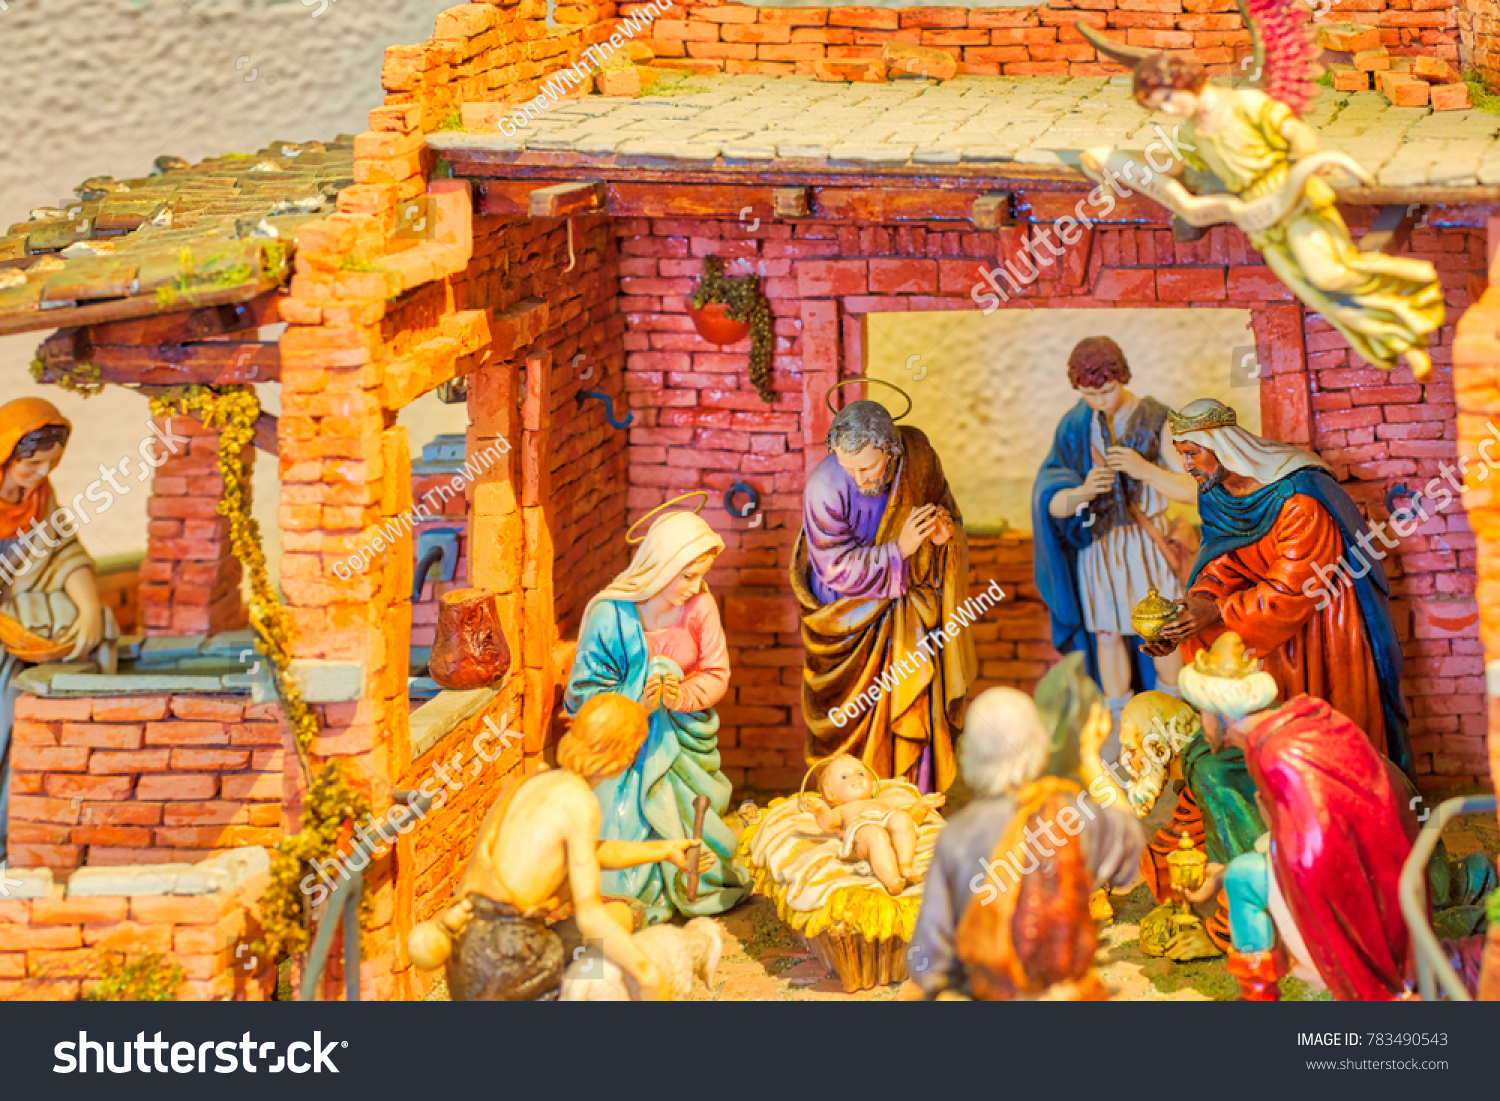 Christmas Nativity scene with The Three Wise Men visiting The Holy Child The Blessed Virgin